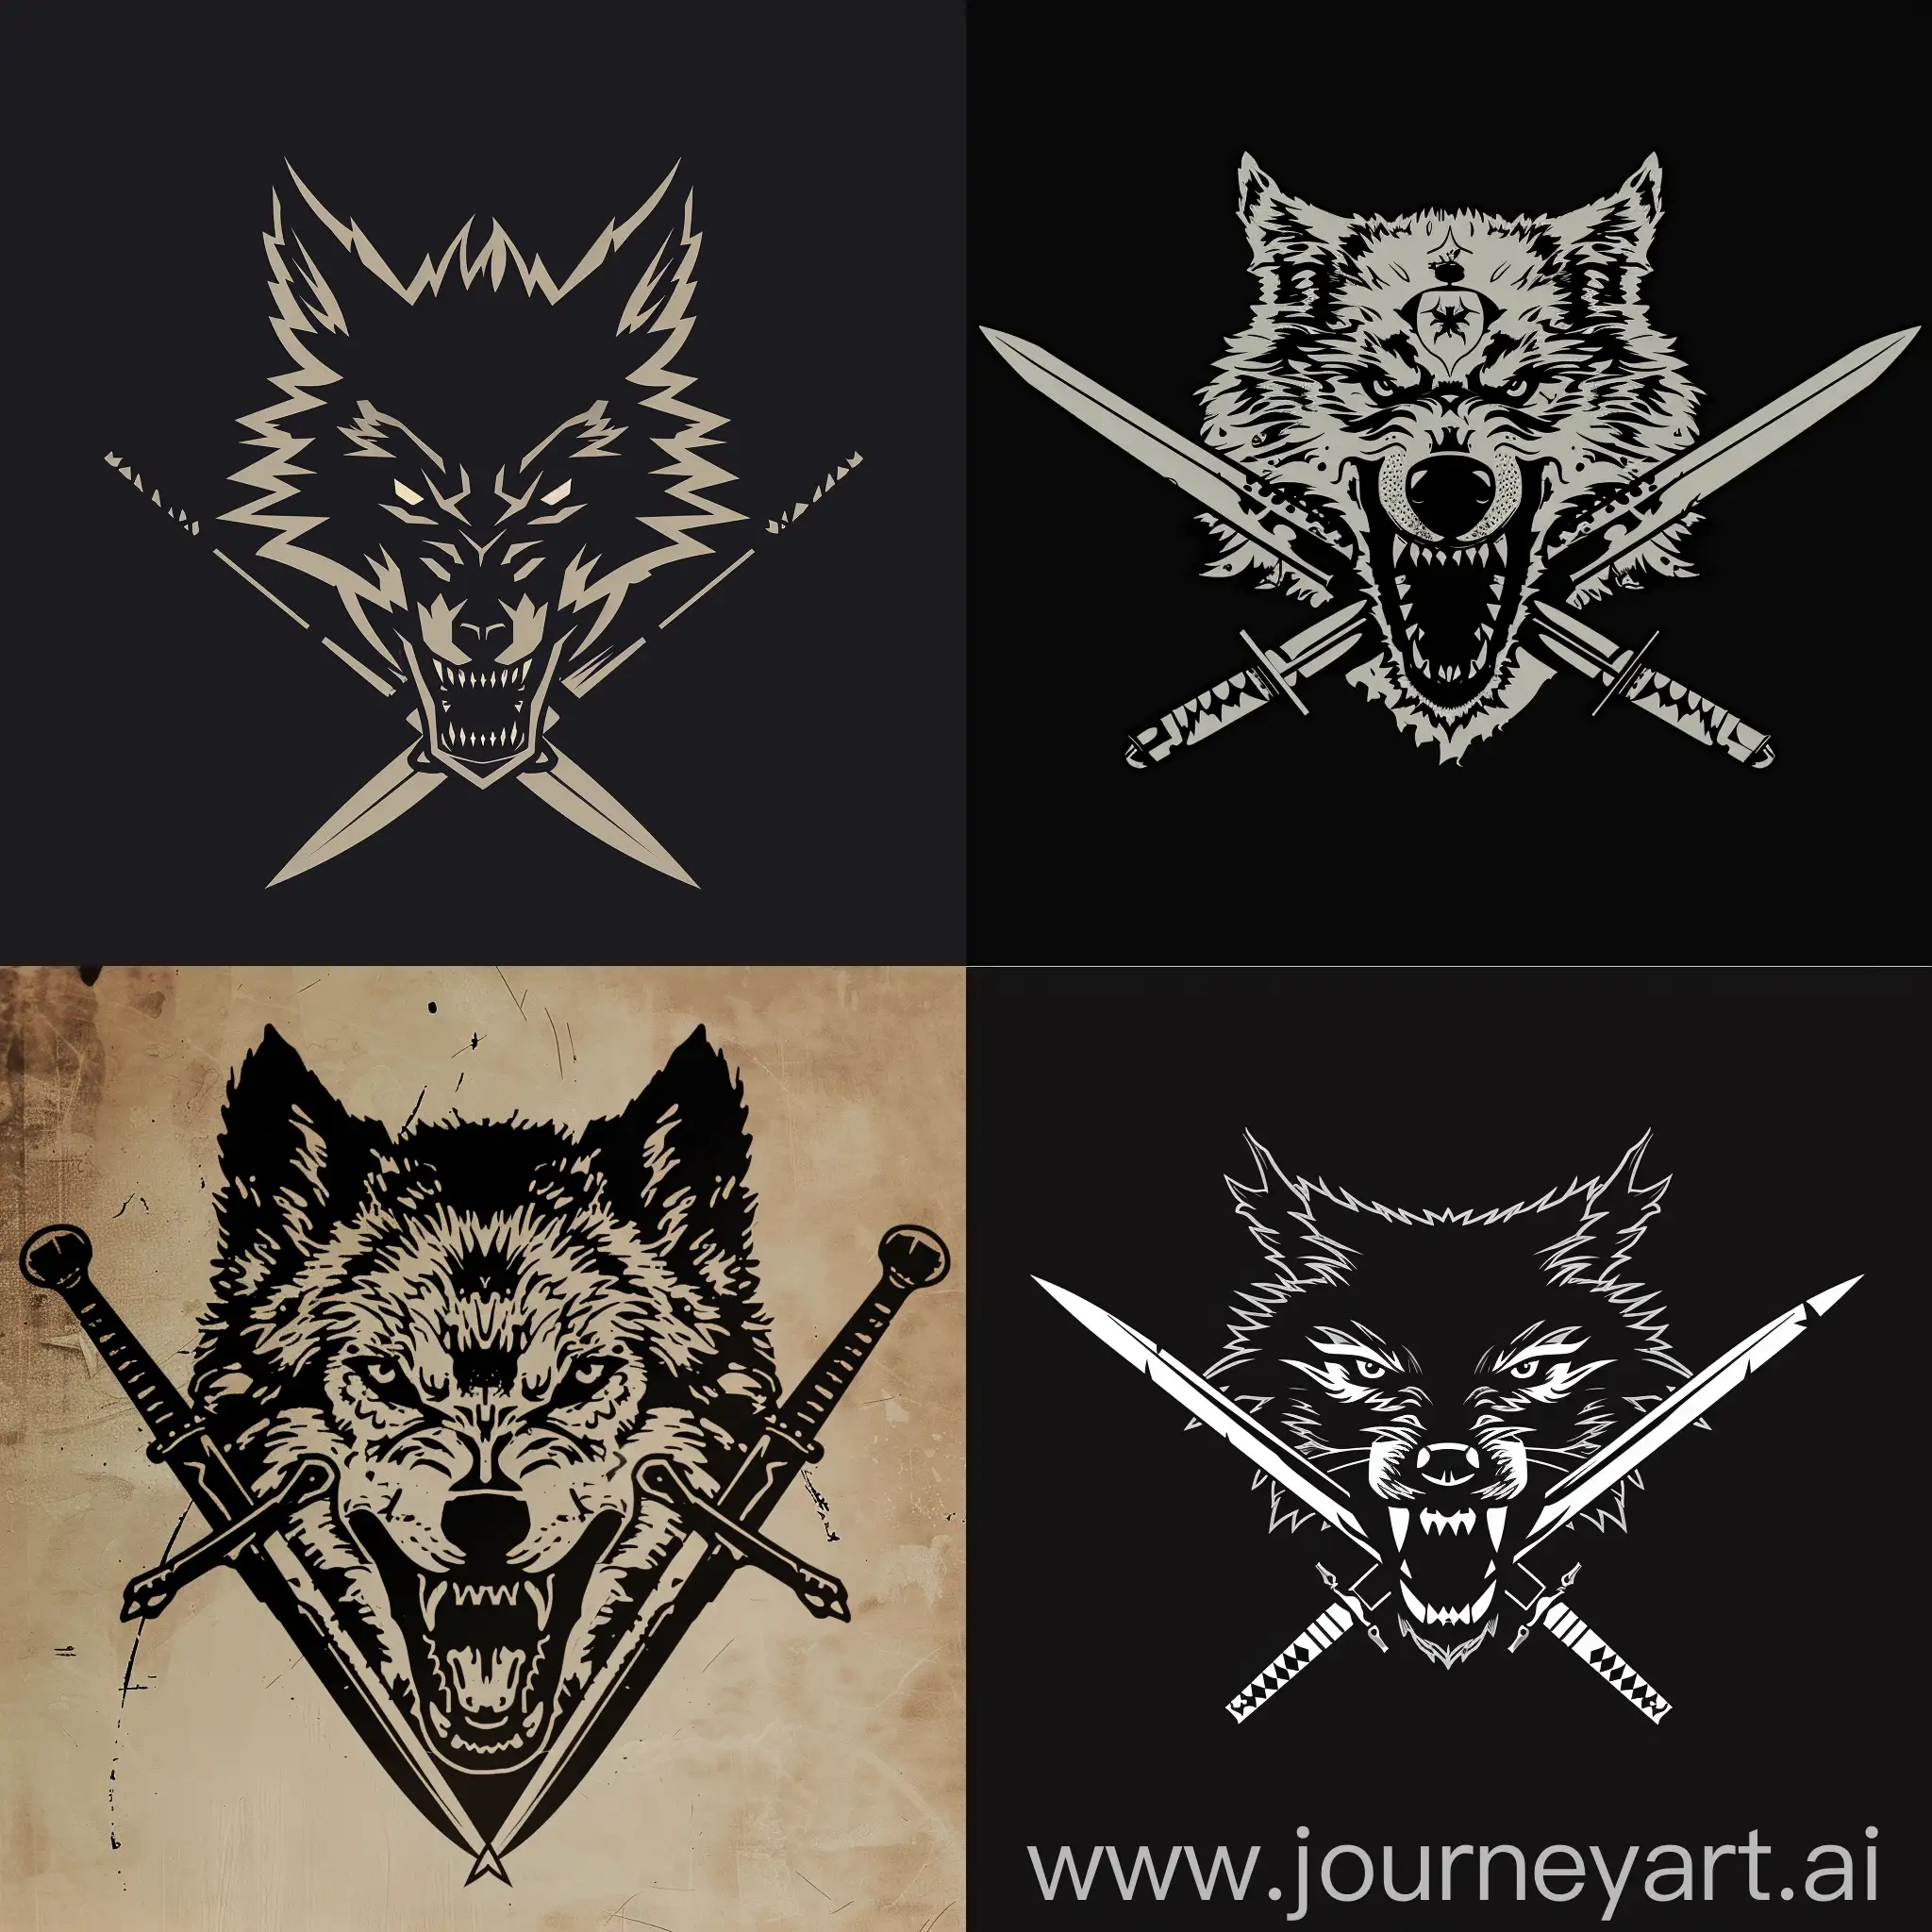 Draw the logo of a tactical company that manufactures things for the military, the logo should depict a wolf with an open mouth and two crossed swords on it